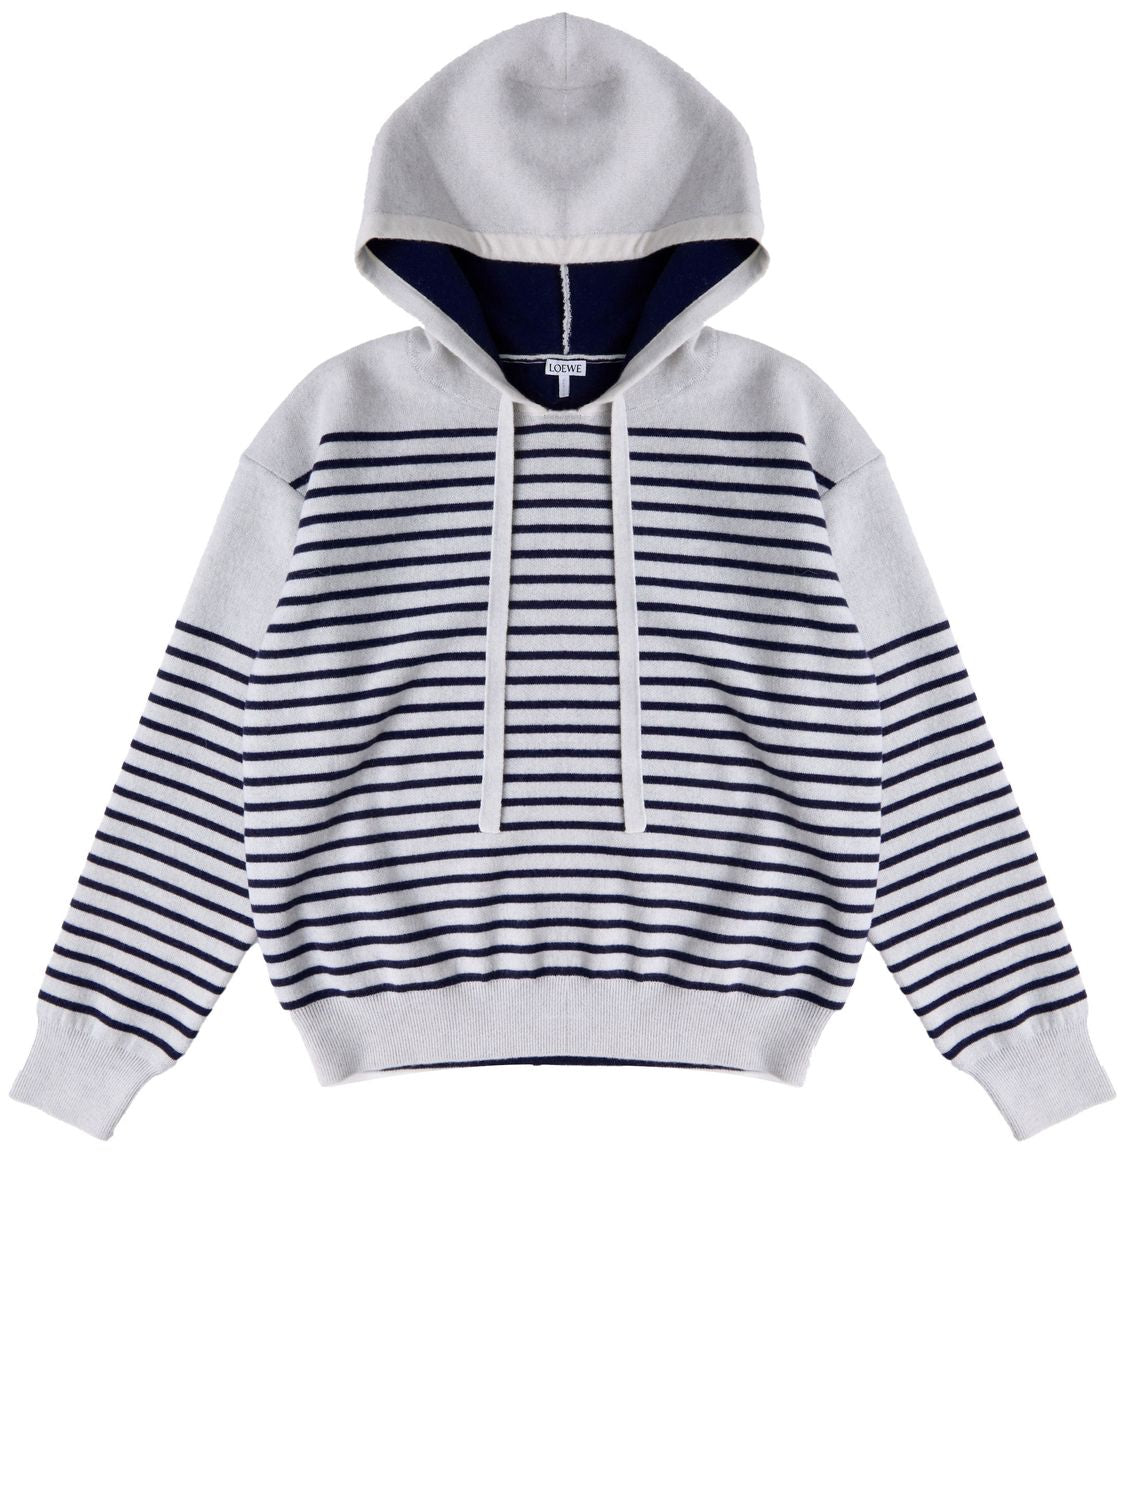 LOEWE Striped Wool Hoodie for Women - Grey and Navy Blue - SS24 Collection